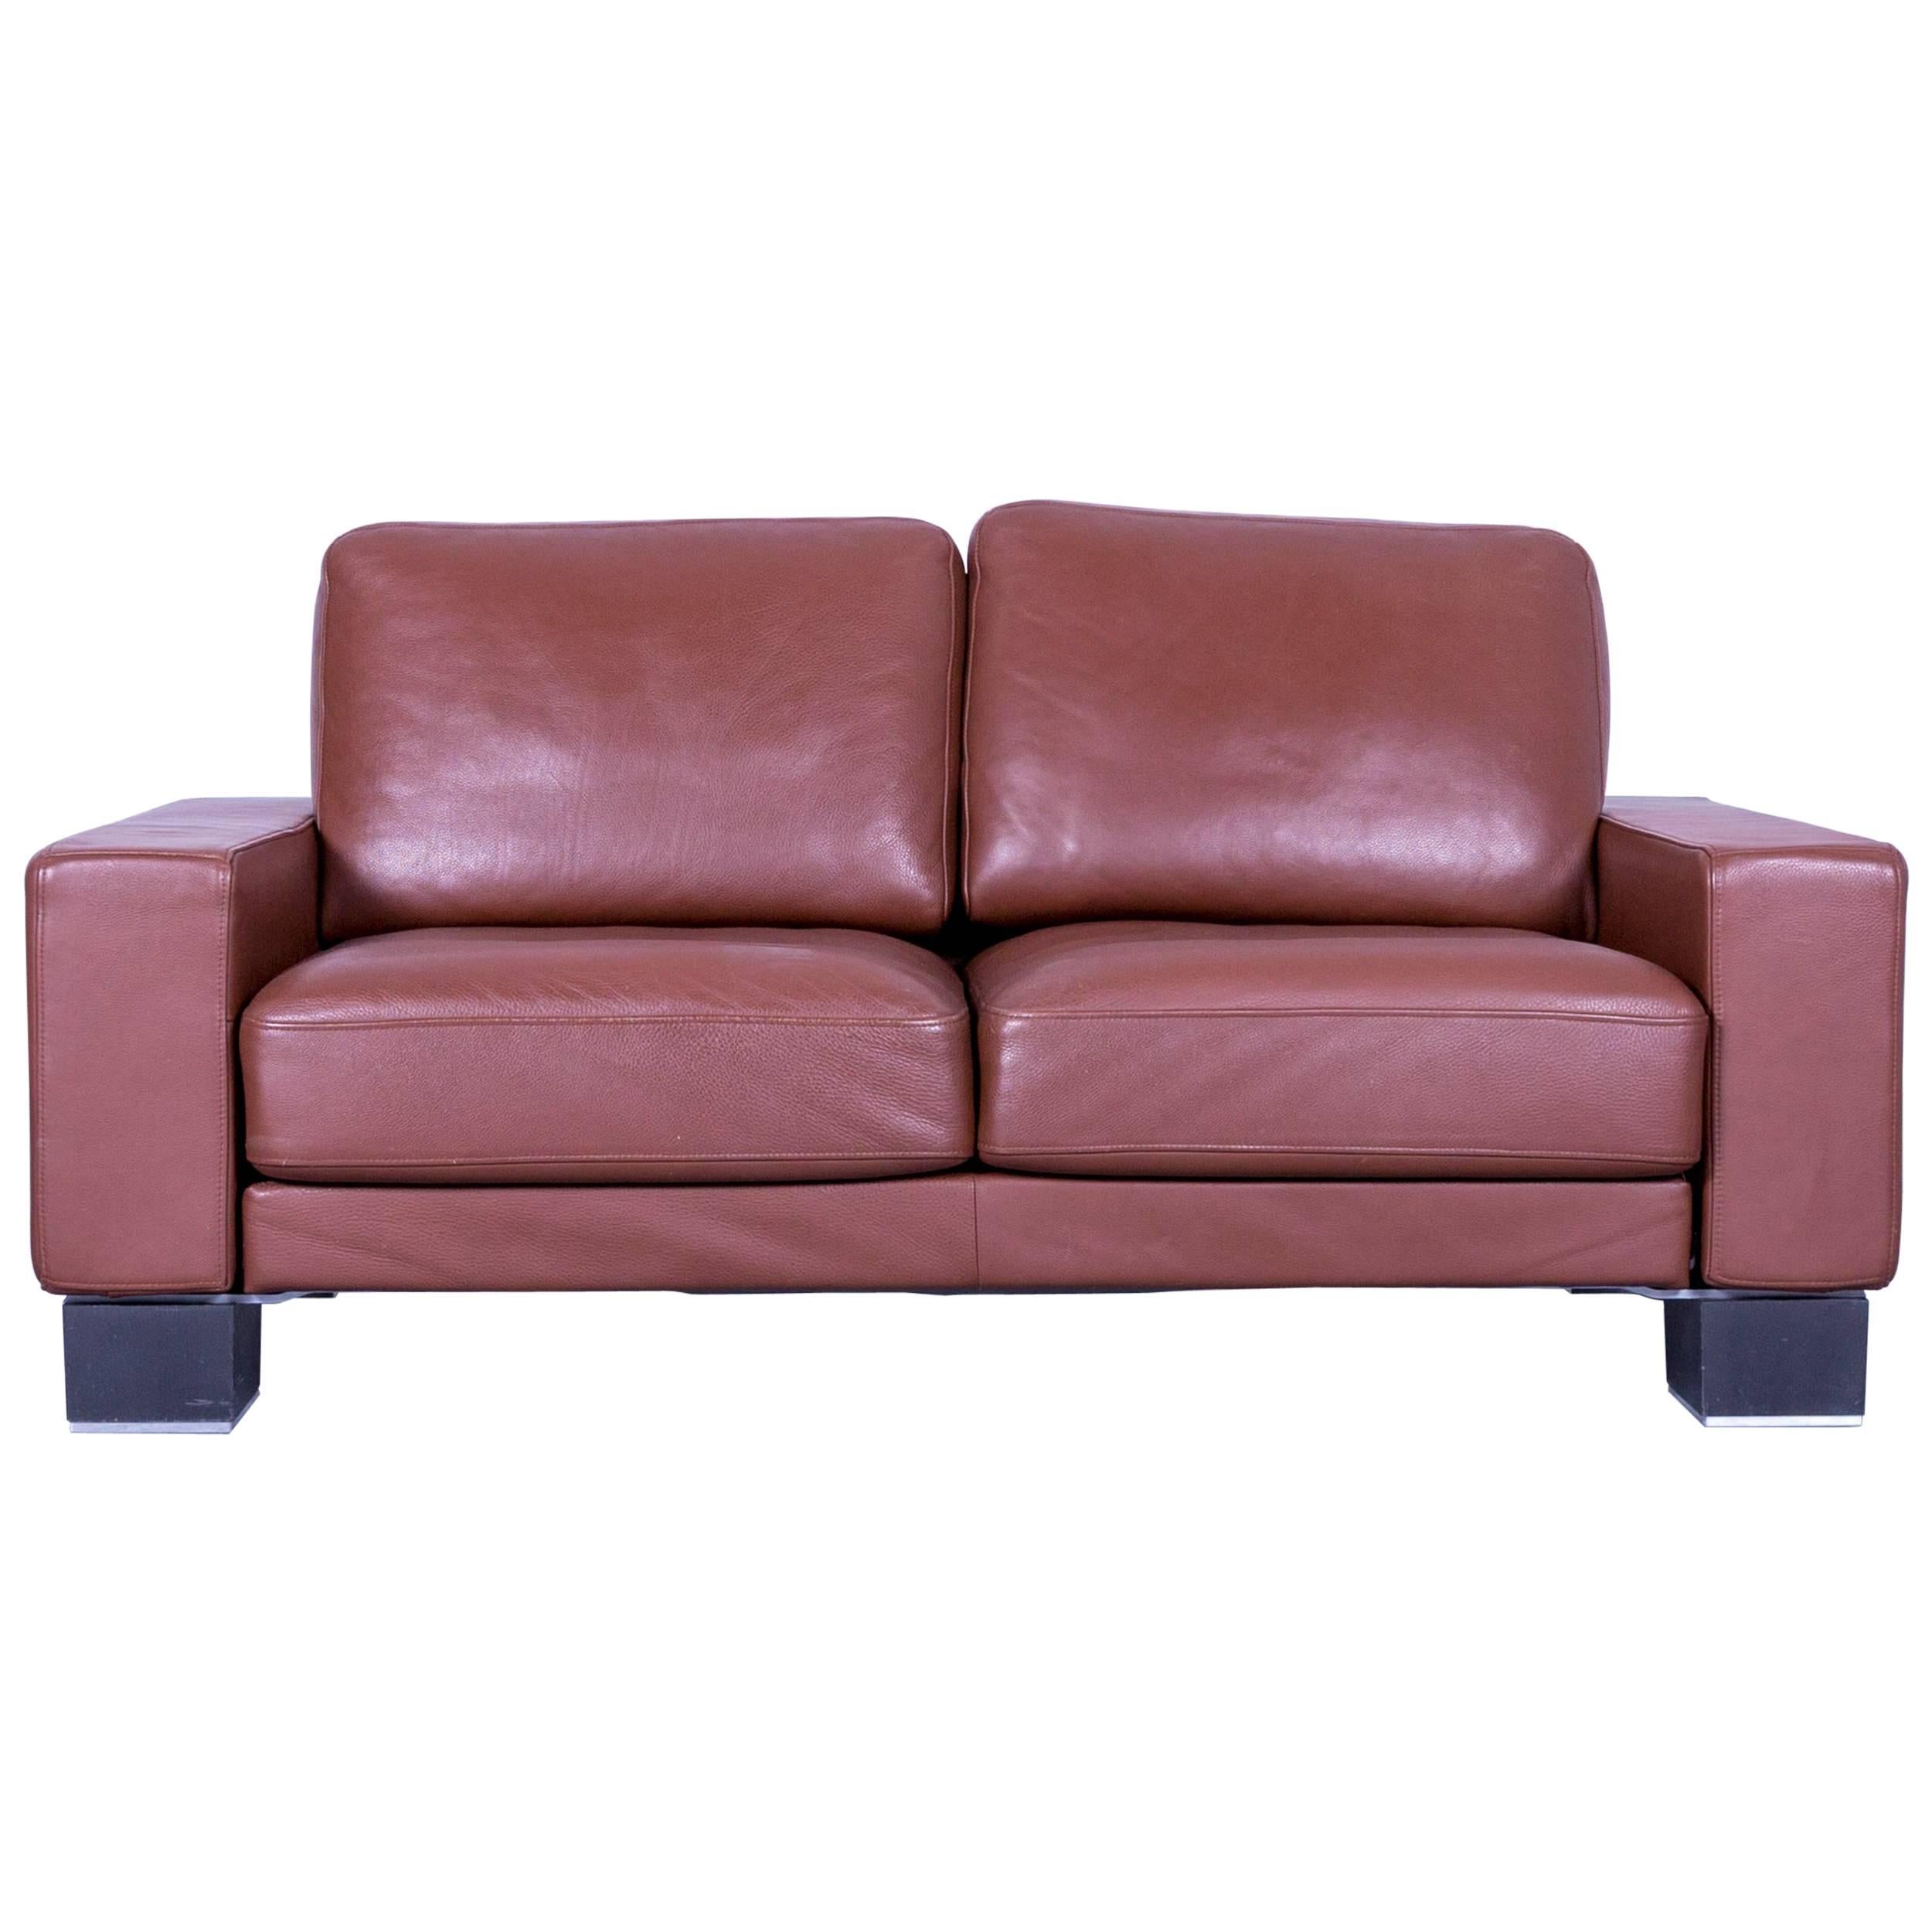 Rolf Benz Ego Designer Leather Sofa Brown Two-Seat